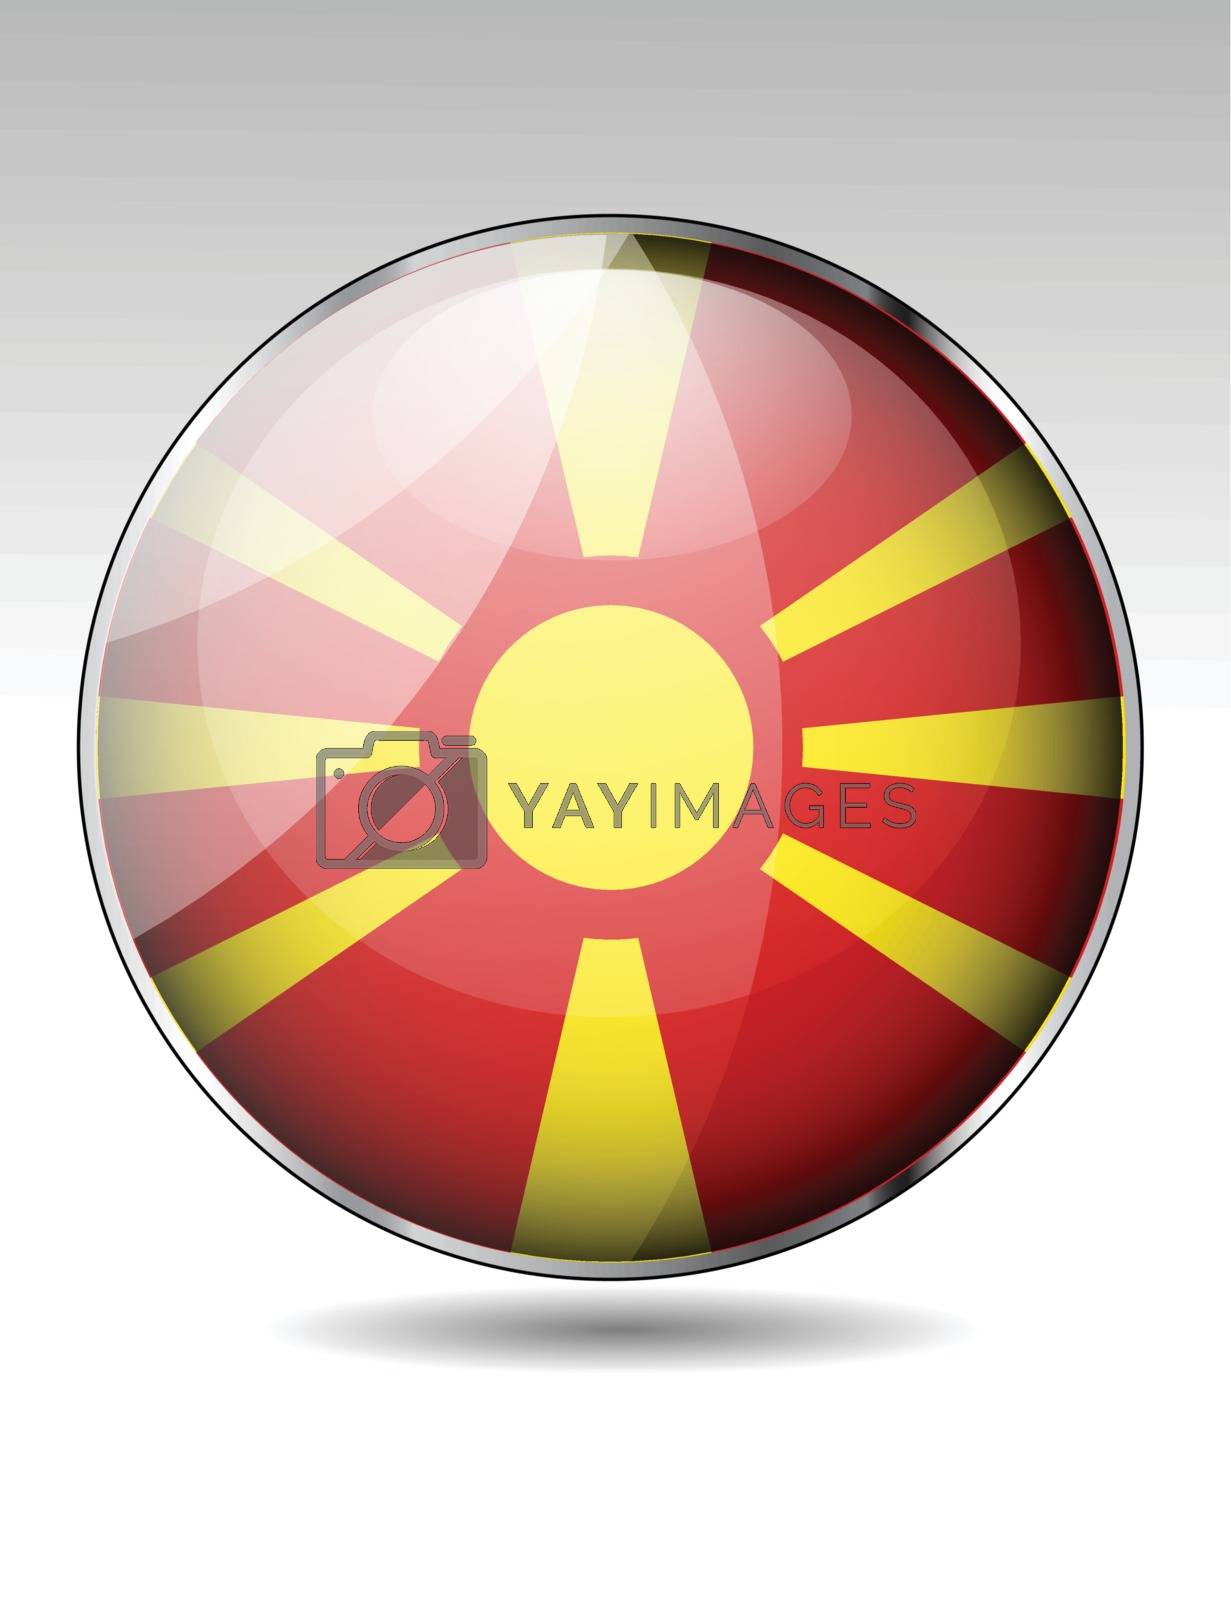 Royalty free image of Macedonia flag button by robin2